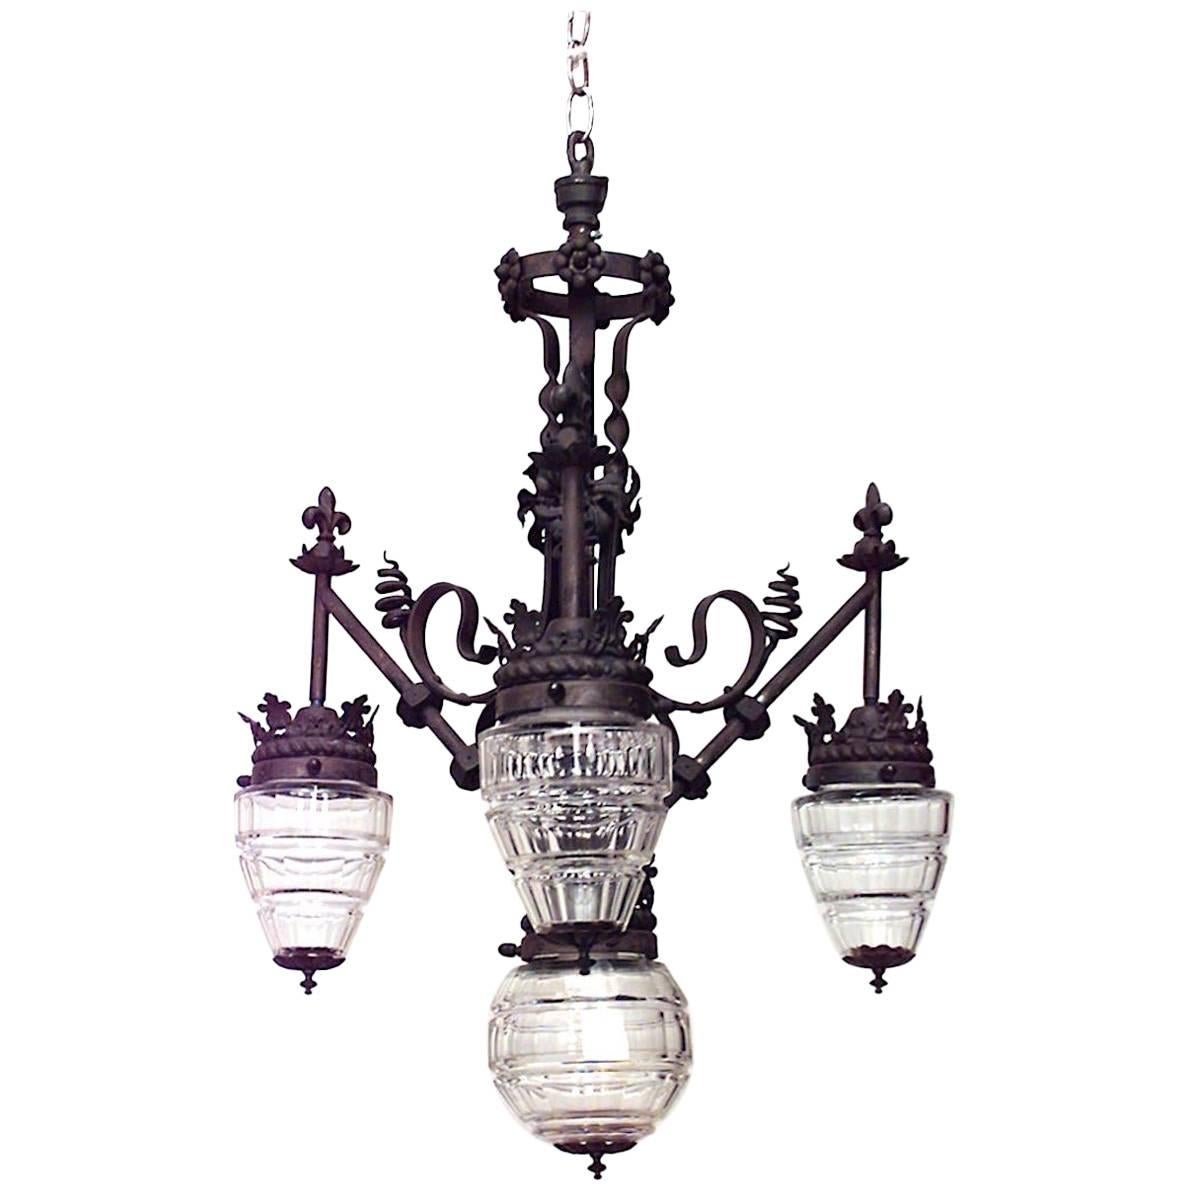 French Provincial Style Wrought Iron and Glass Floral Chandelier For Sale